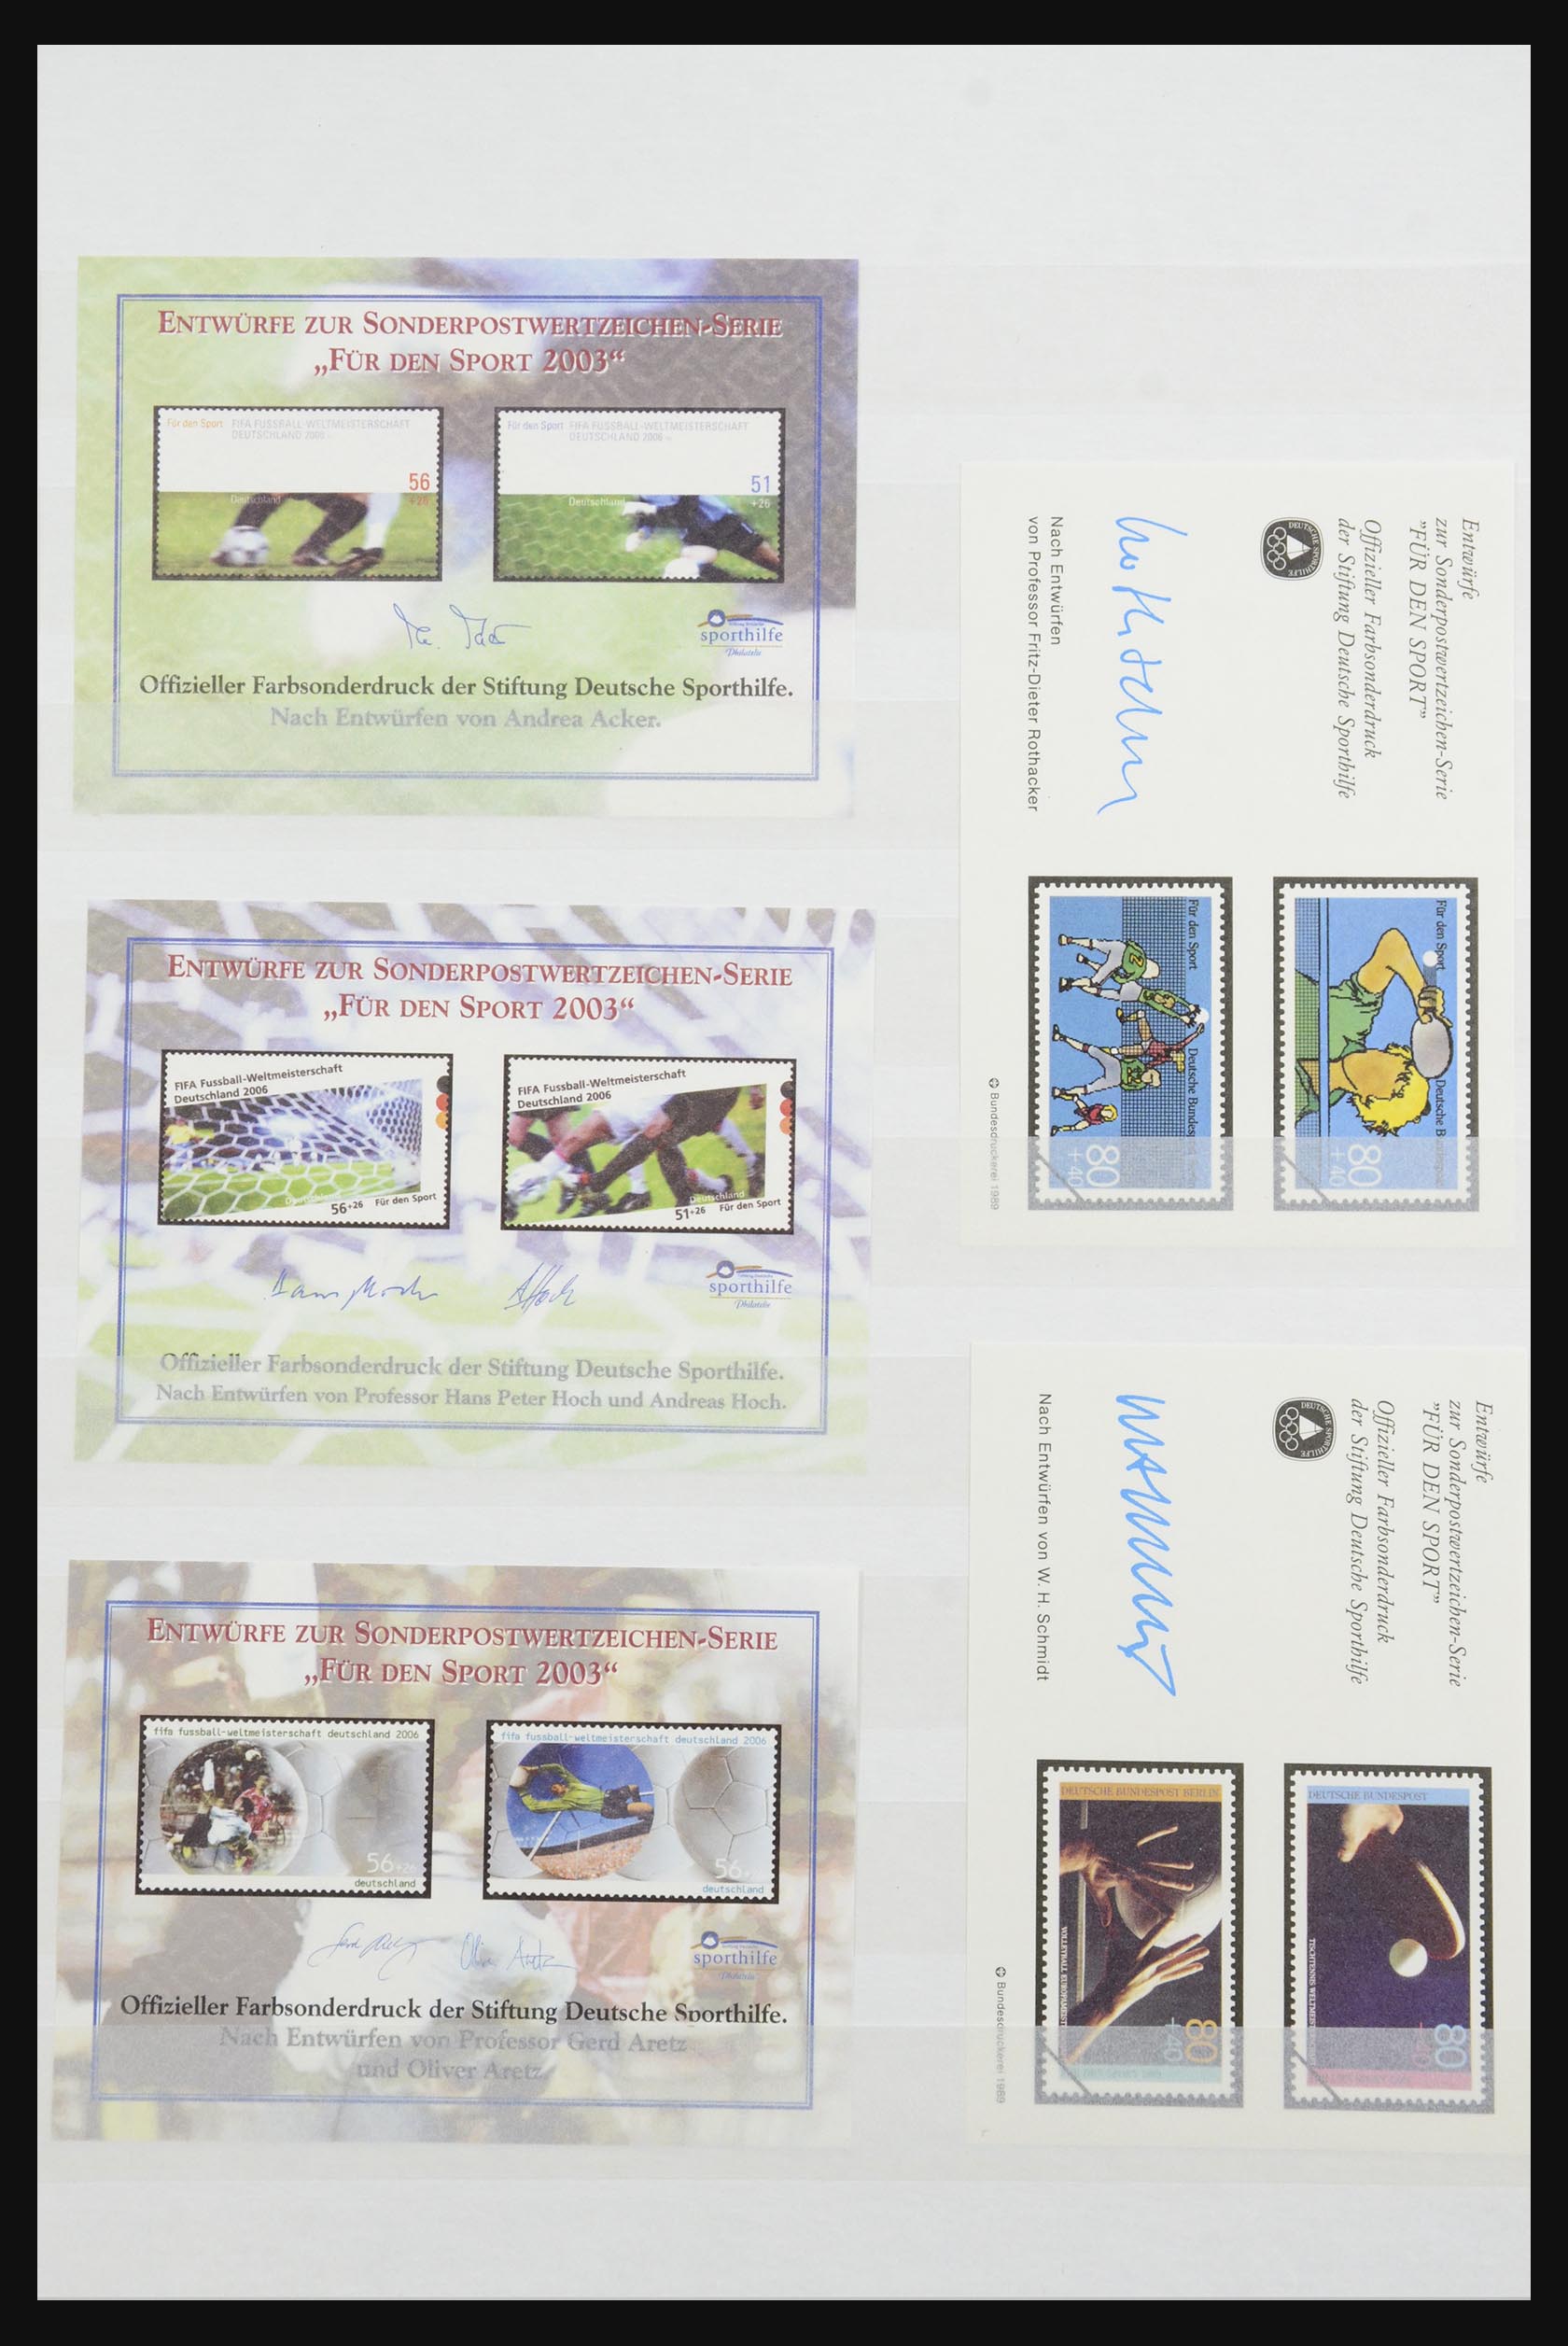 32050 022 - 32050 Bundespost special sheets 1980-2010.